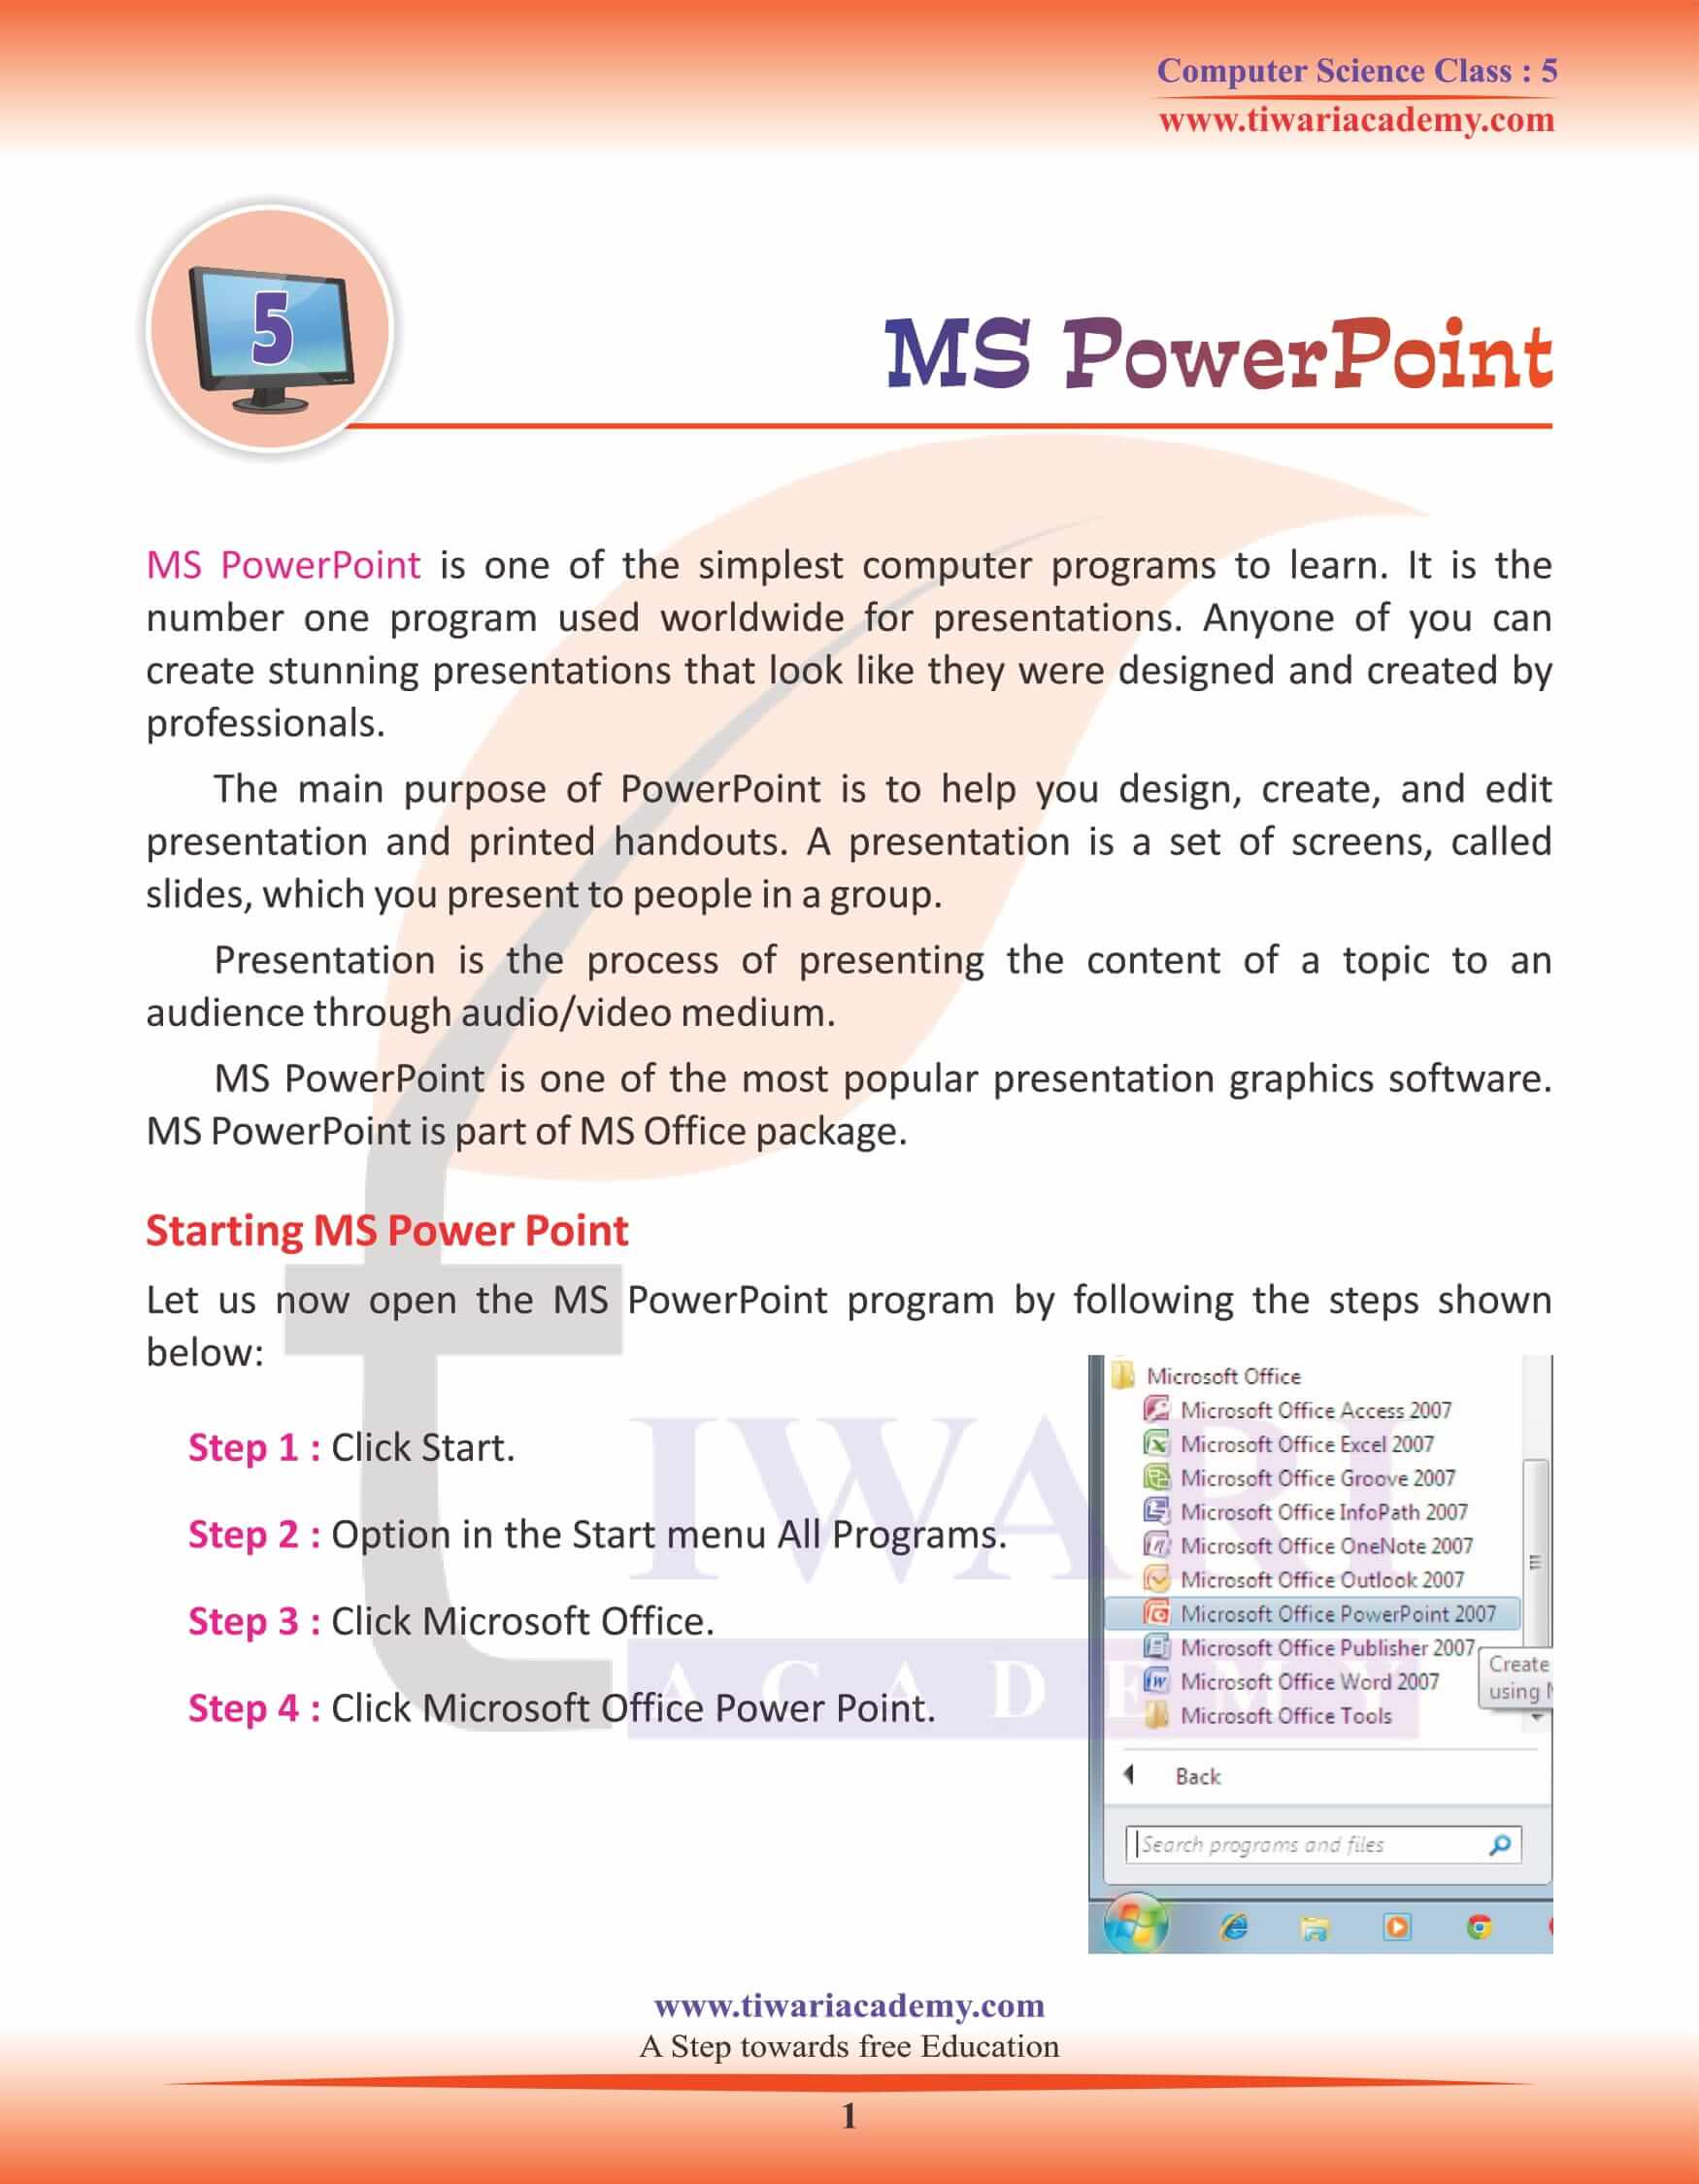 Class 5 Computer Science Chapter 5 MS PowerPoint